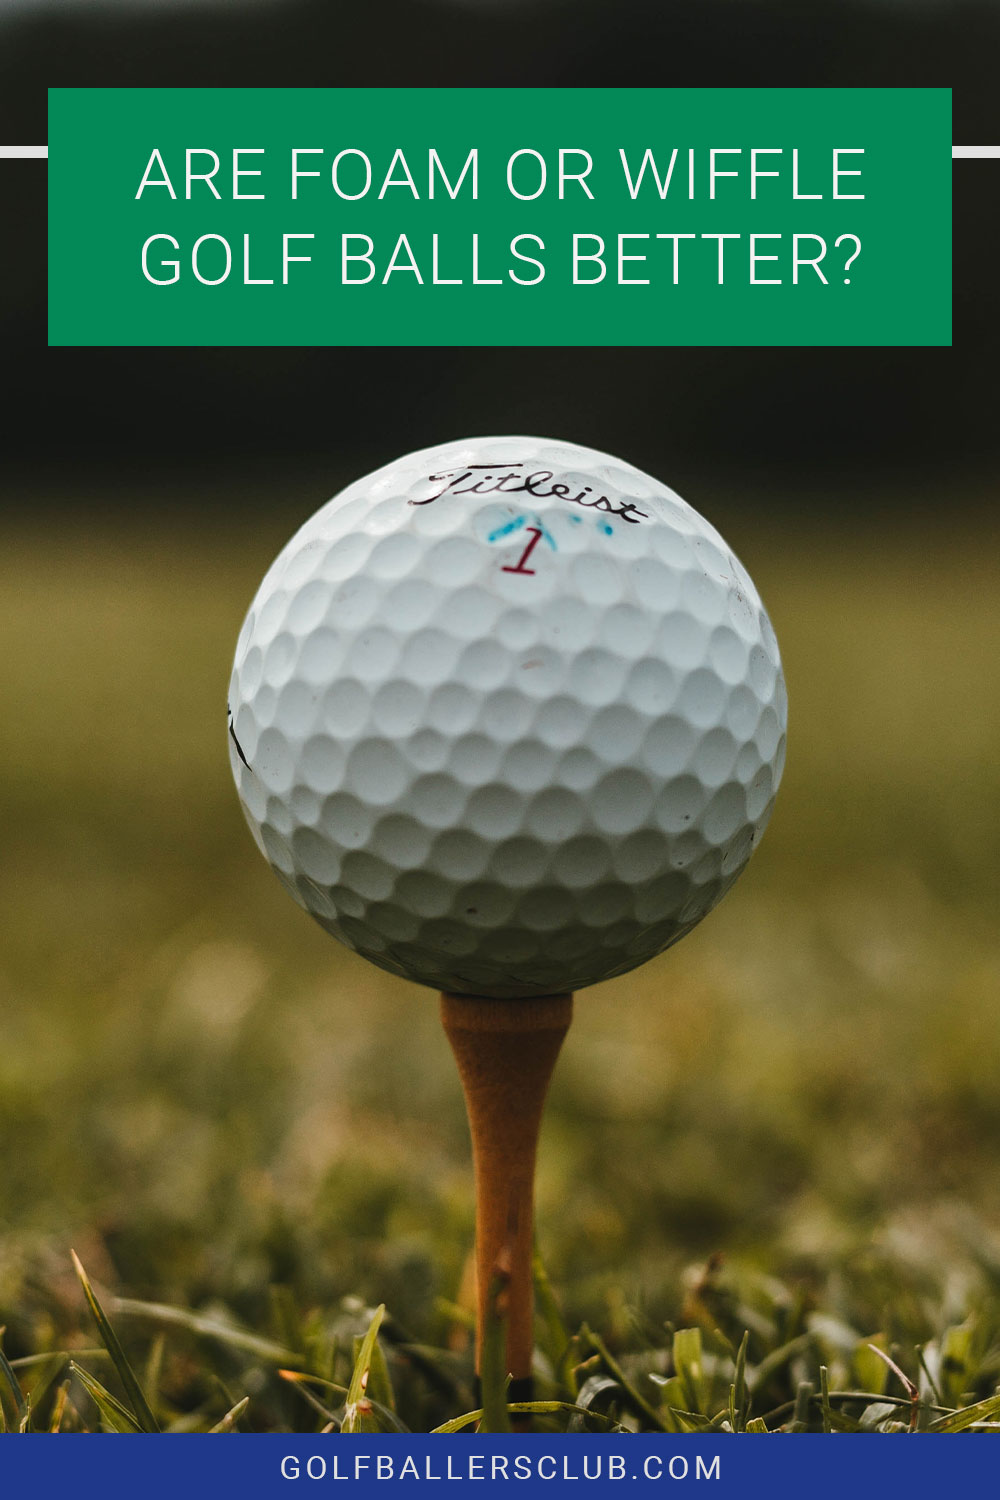 A golf ball on a red tee - Are Foam or Wiffle Golf Balls Better?